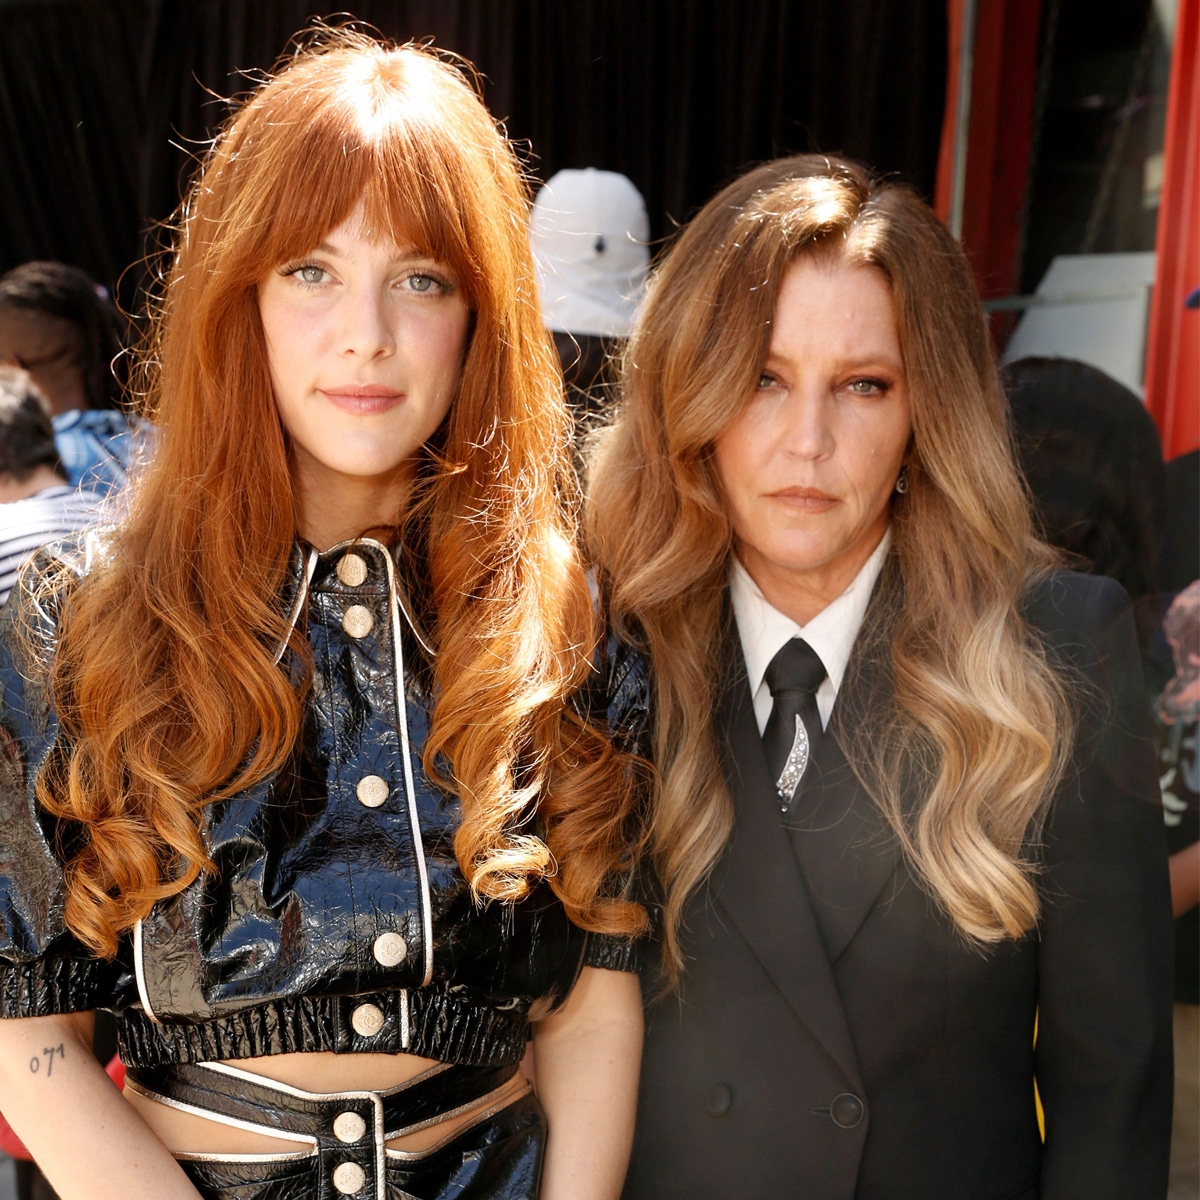 Riley Keough Shares Photo of the Last Time She Saw Lisa Marie Presley